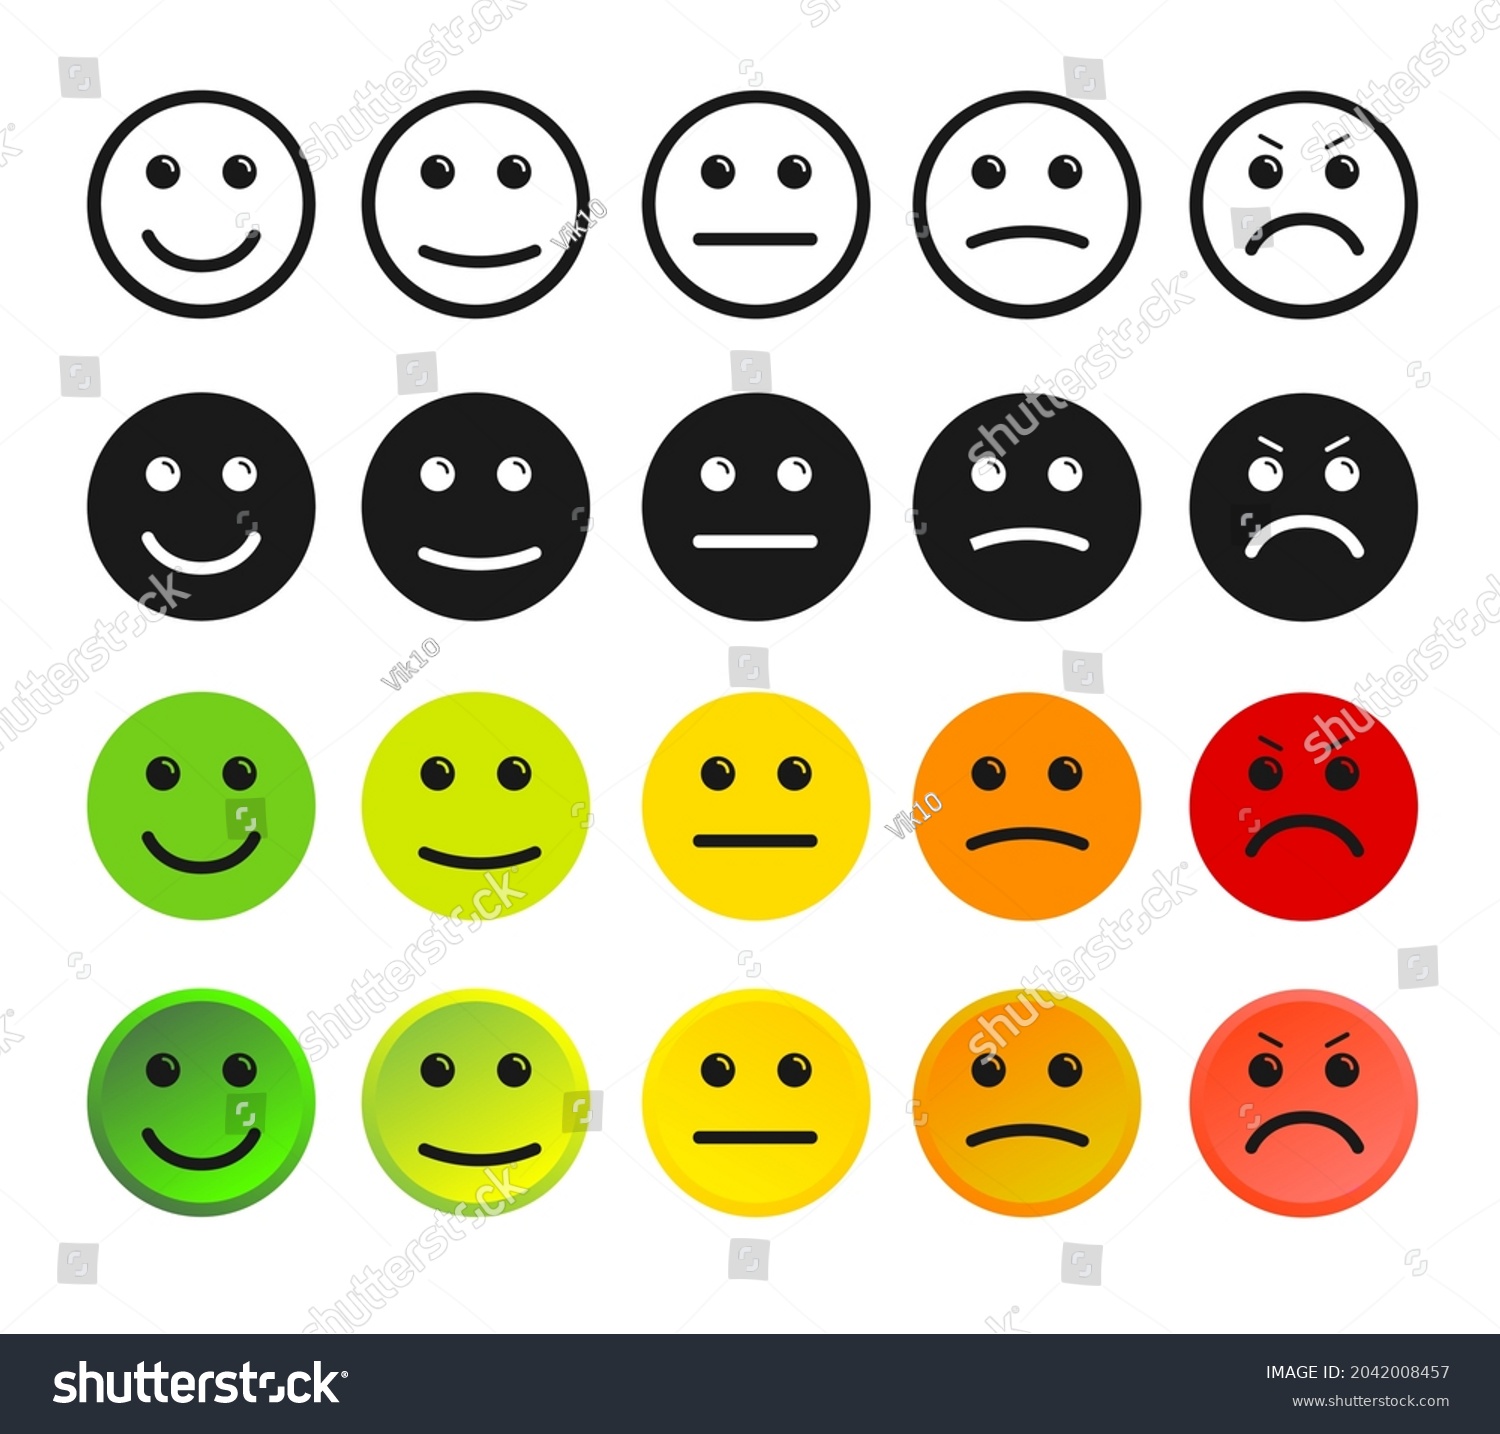 Rating Feedback Scale Isolated Emoticon Concept Stock Vector (Royalty ...